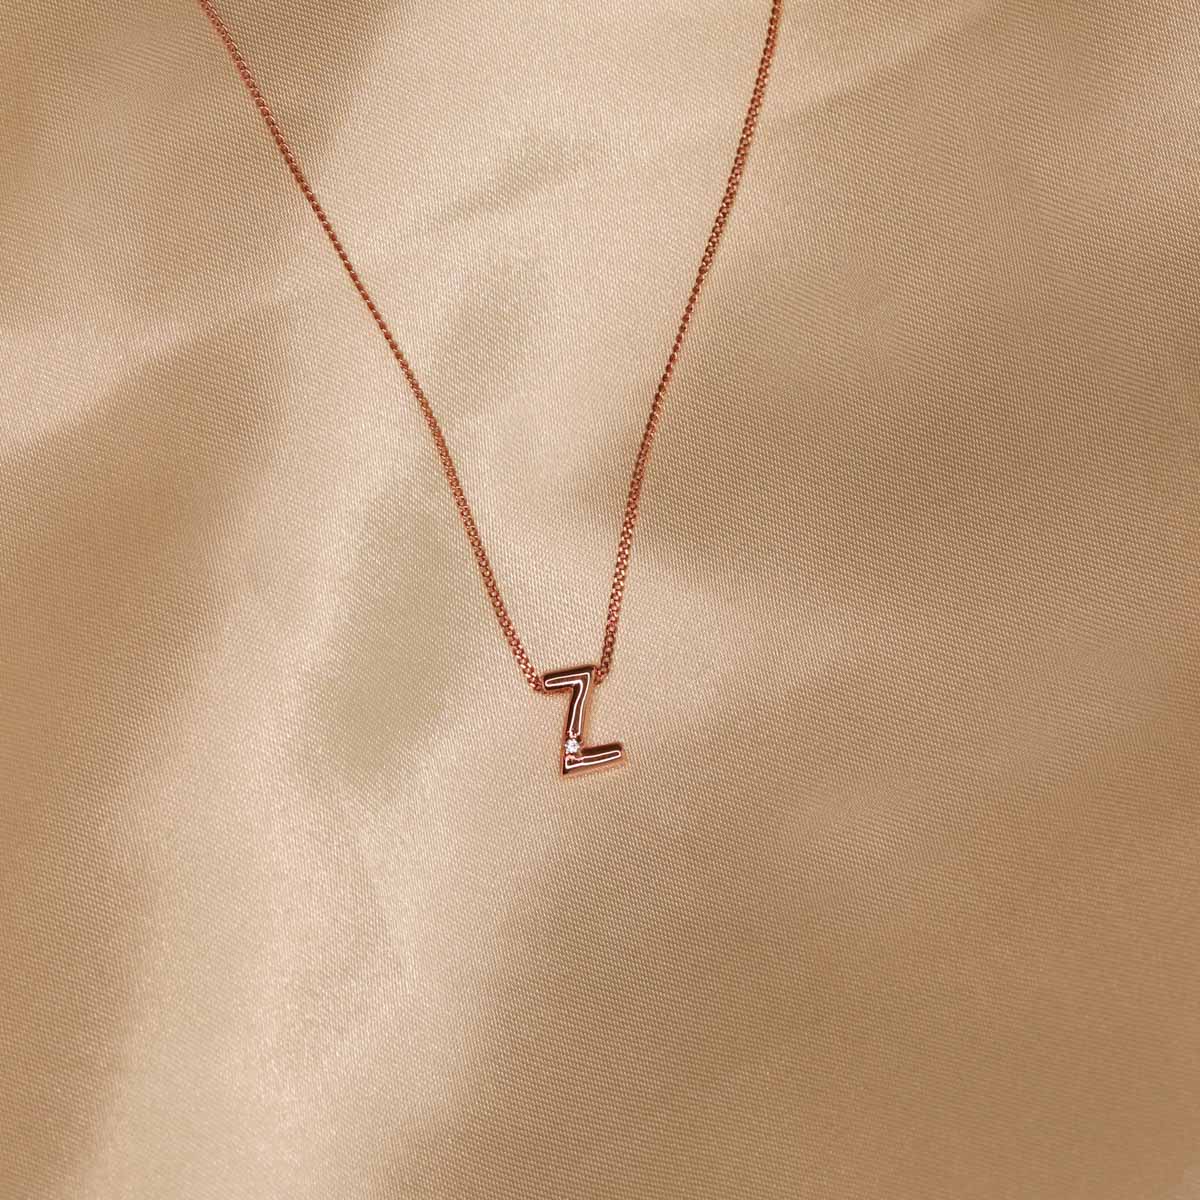 Flat lay shot of Z Initial Pendant Necklace in Rose Gold